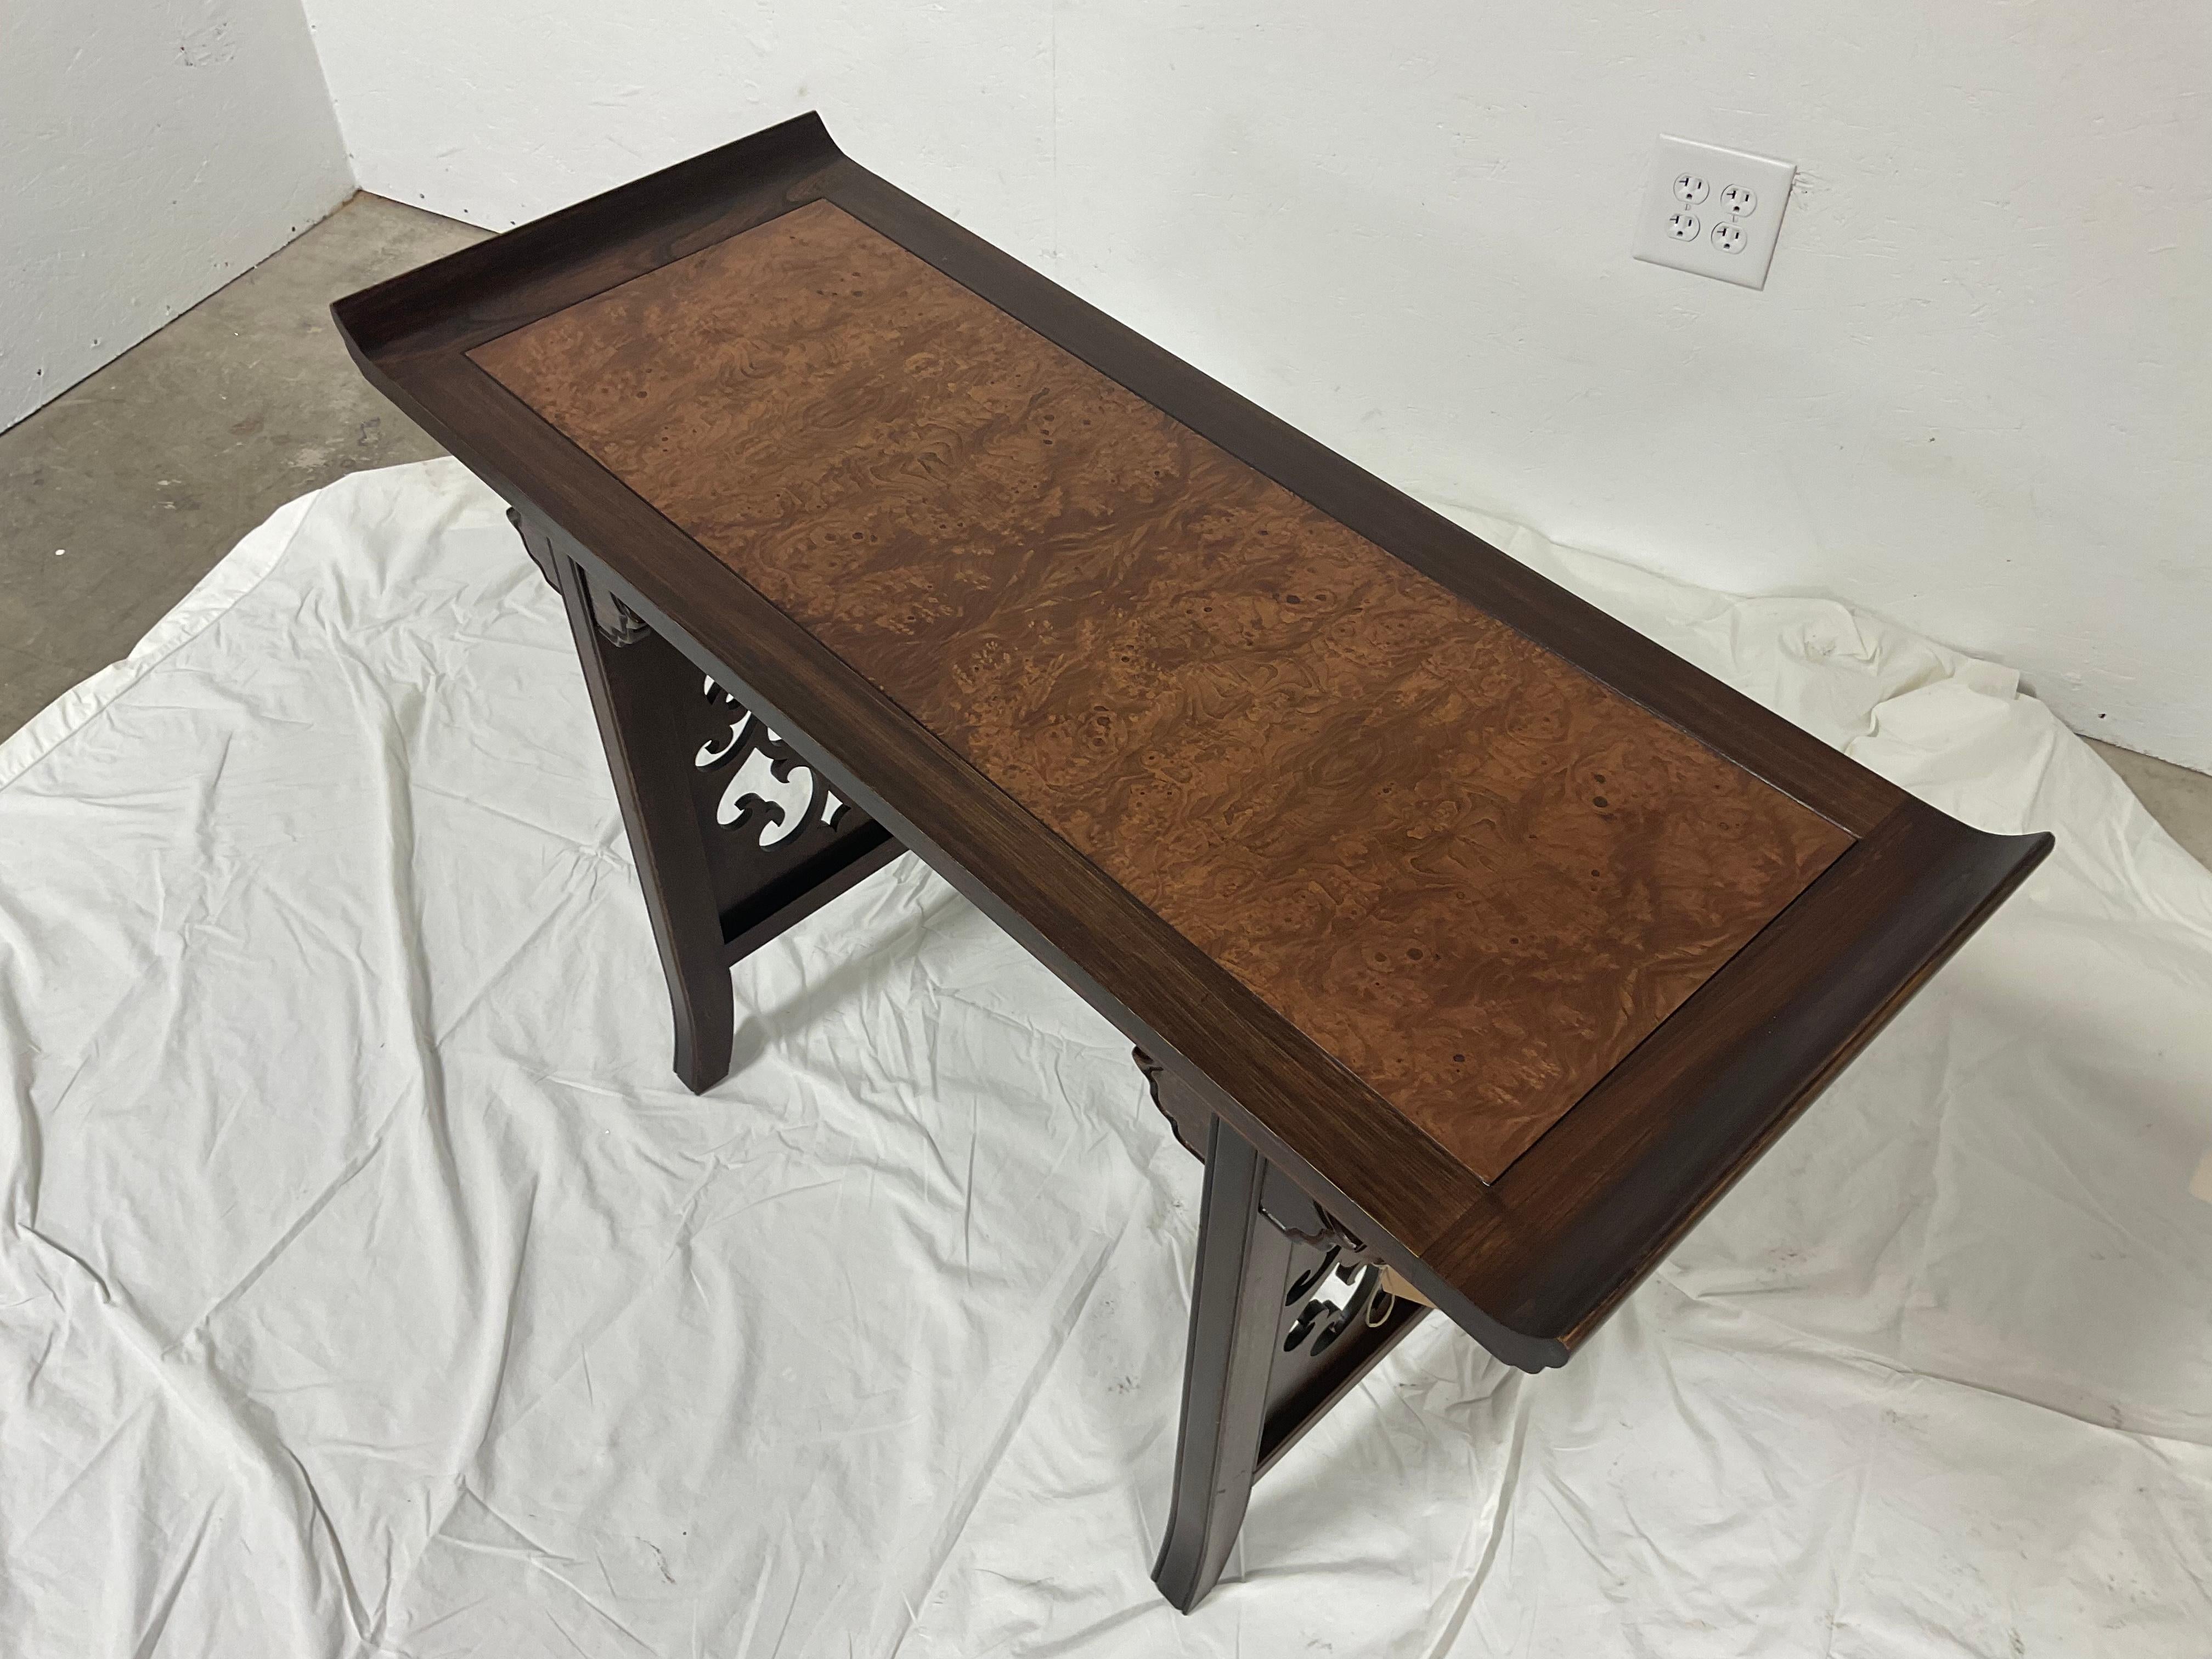 I love the size of this altar table, designed by Michael Taylor, for Baker Furniture. The size makes it useful, in so many locations. The center has a beautiful burl wood, with the remainder being decoratively carved walnut.